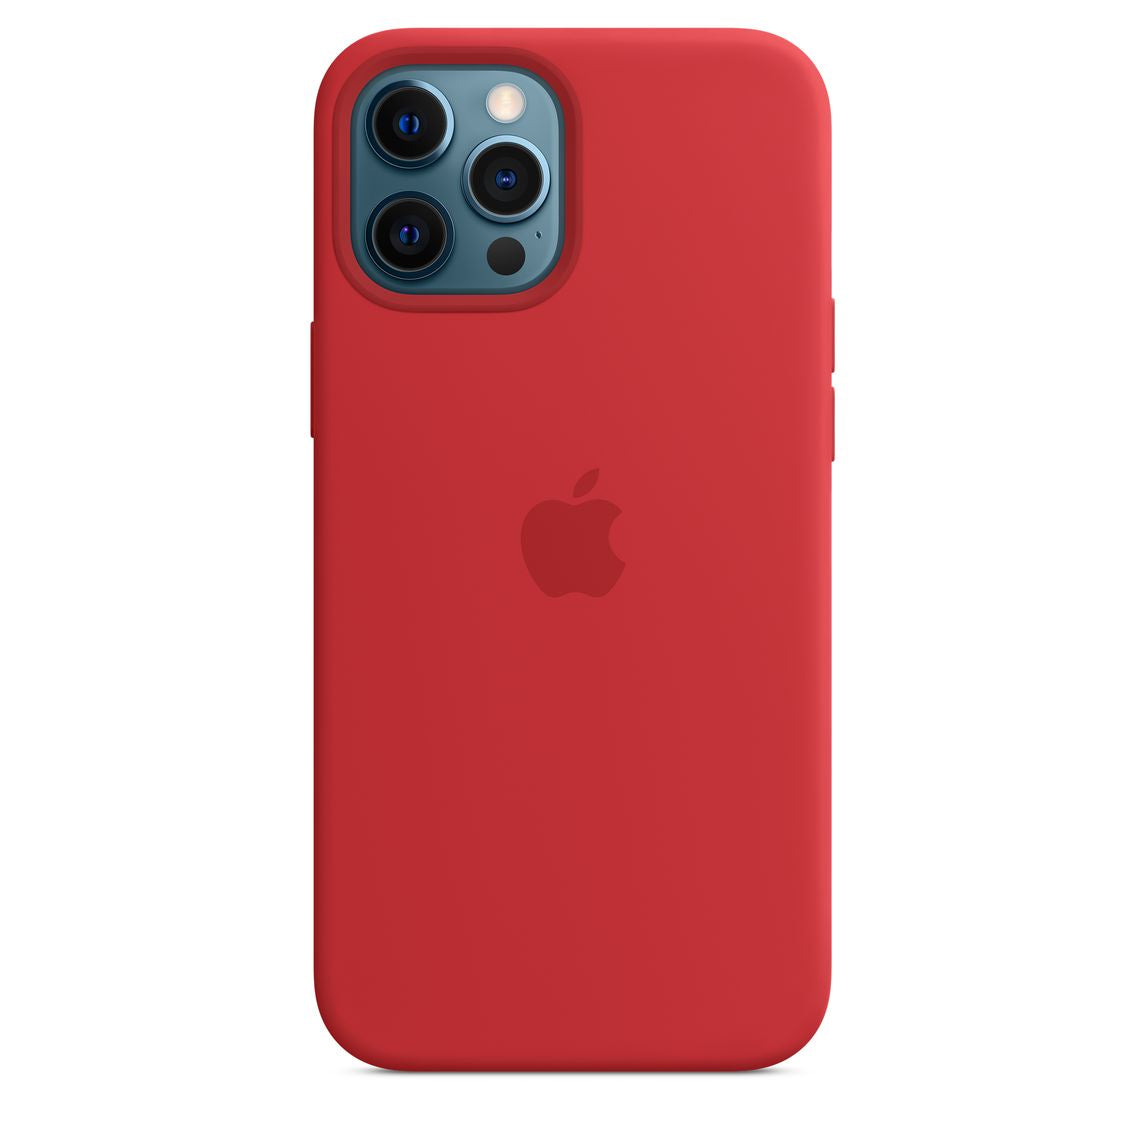 iPhone 12 Pro Max Silicone Case - New - Mac Shack